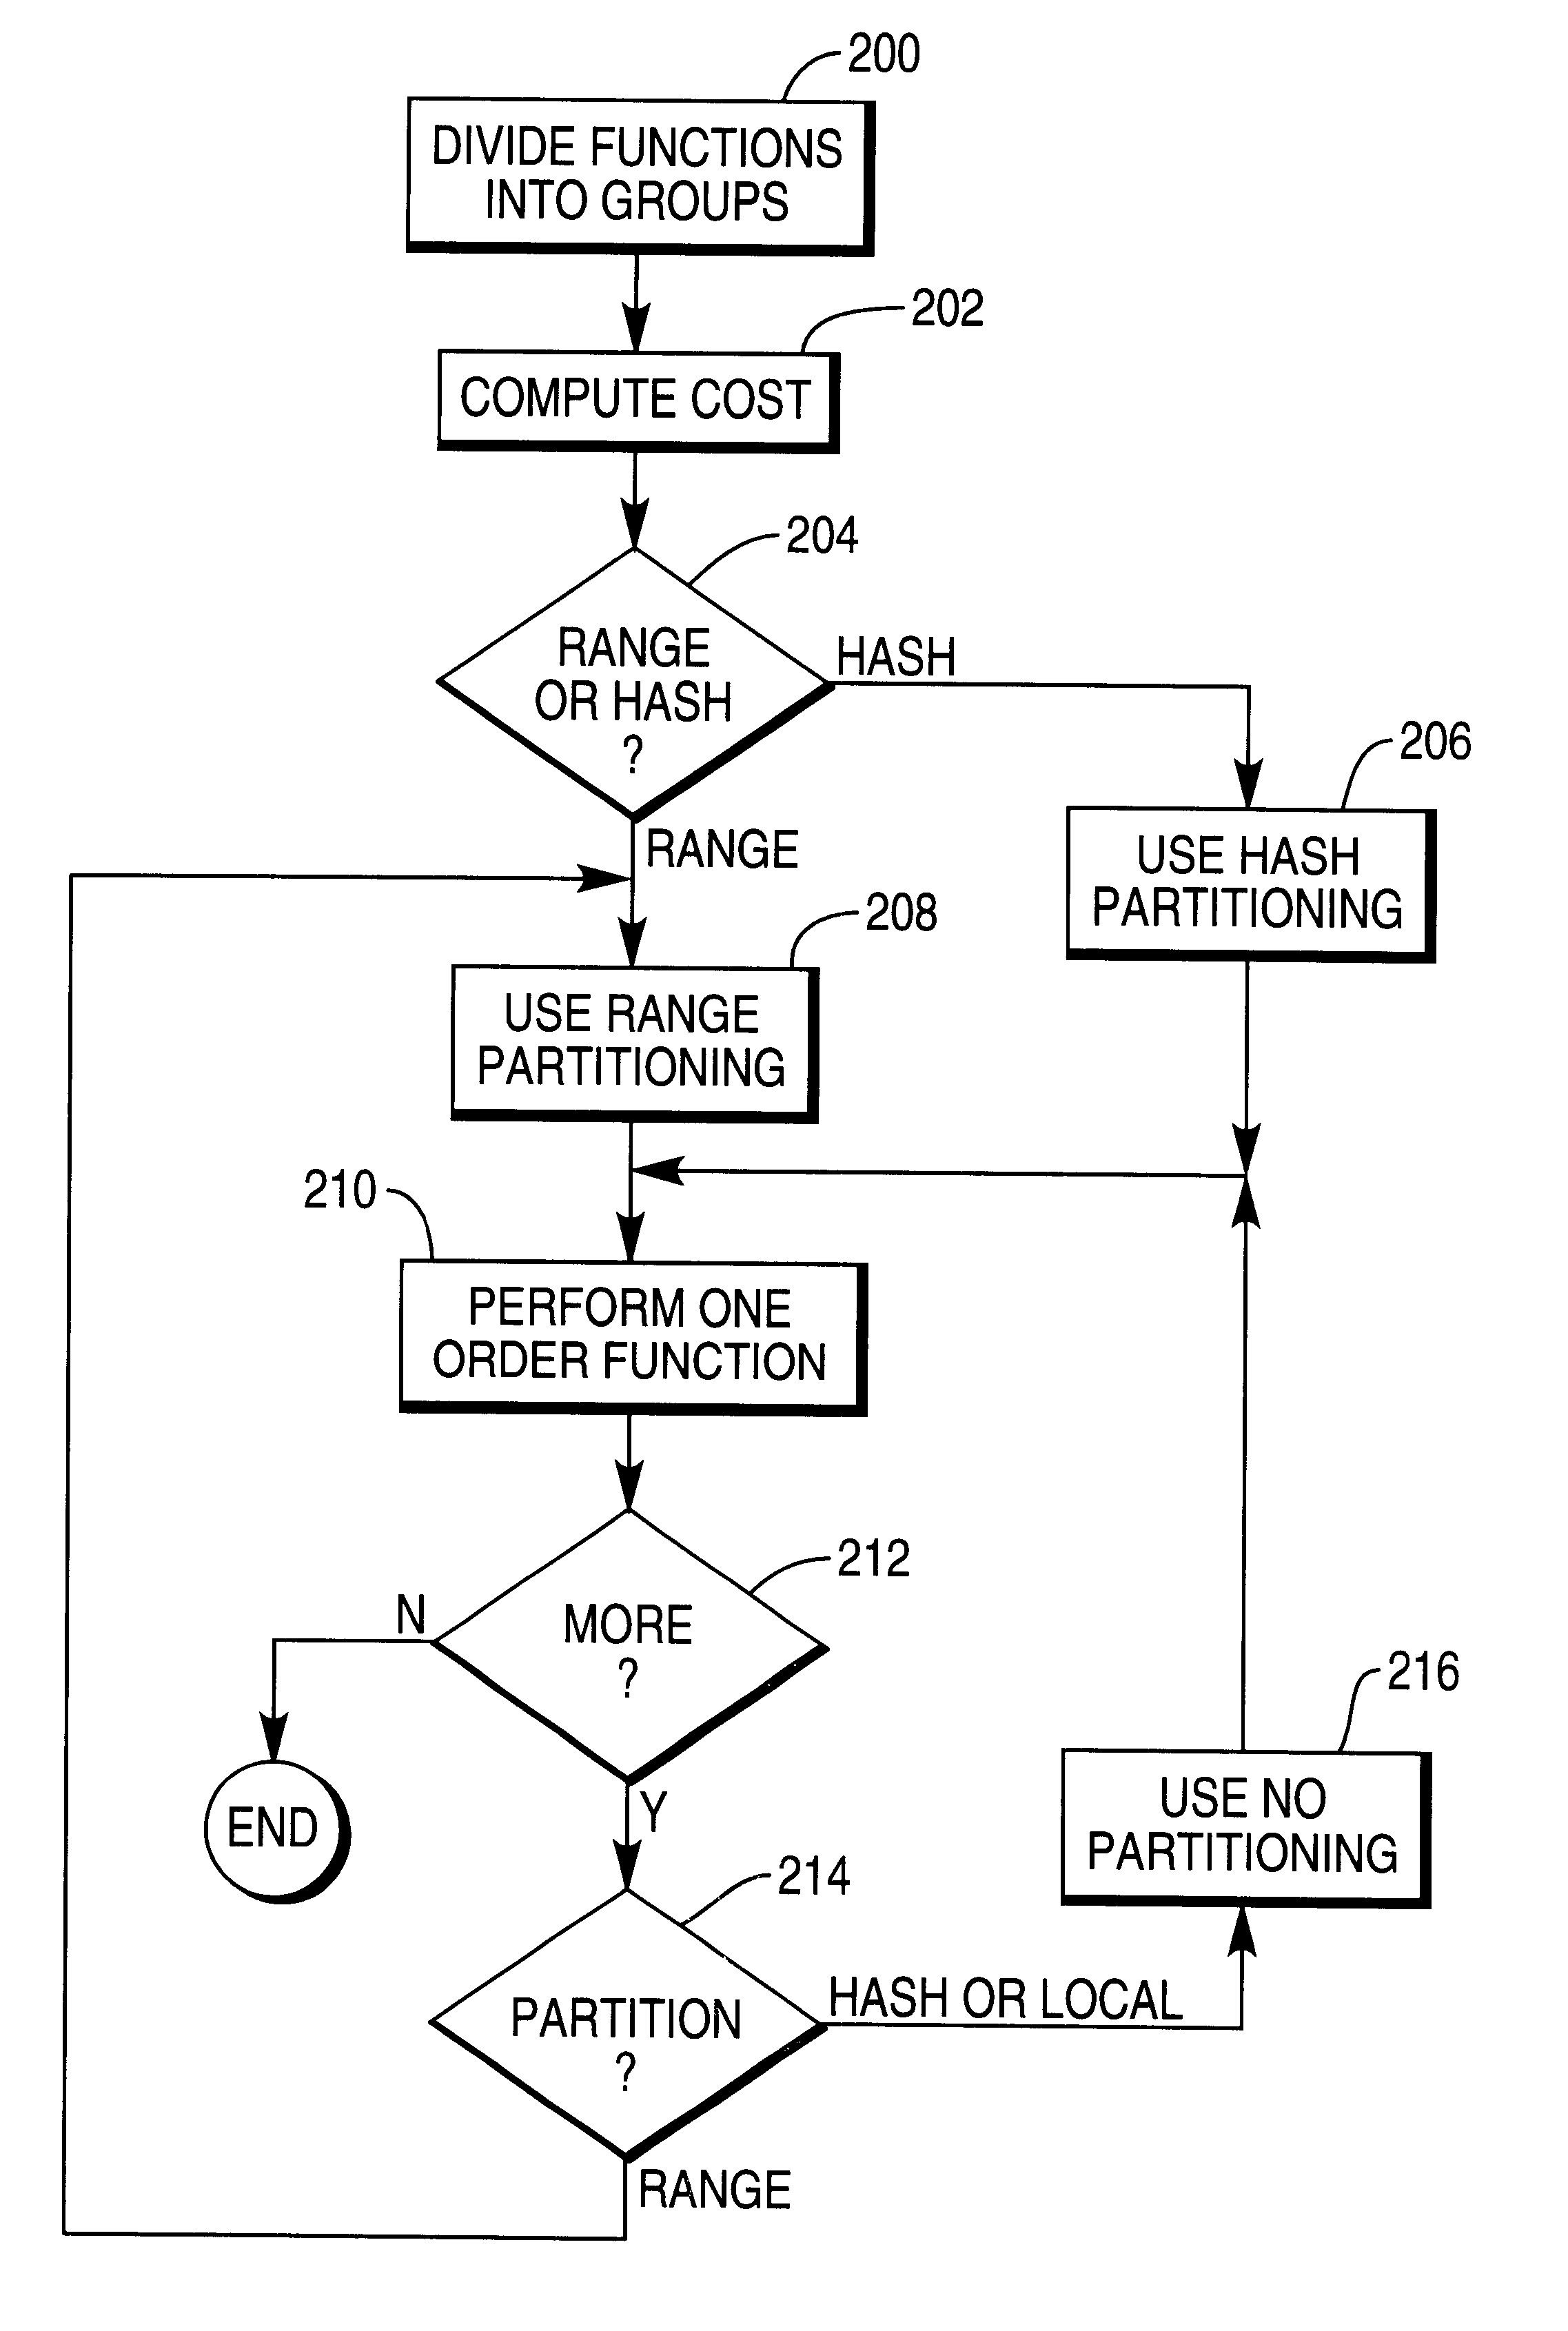 Computing multiple order-based functions in a parallel processing database system